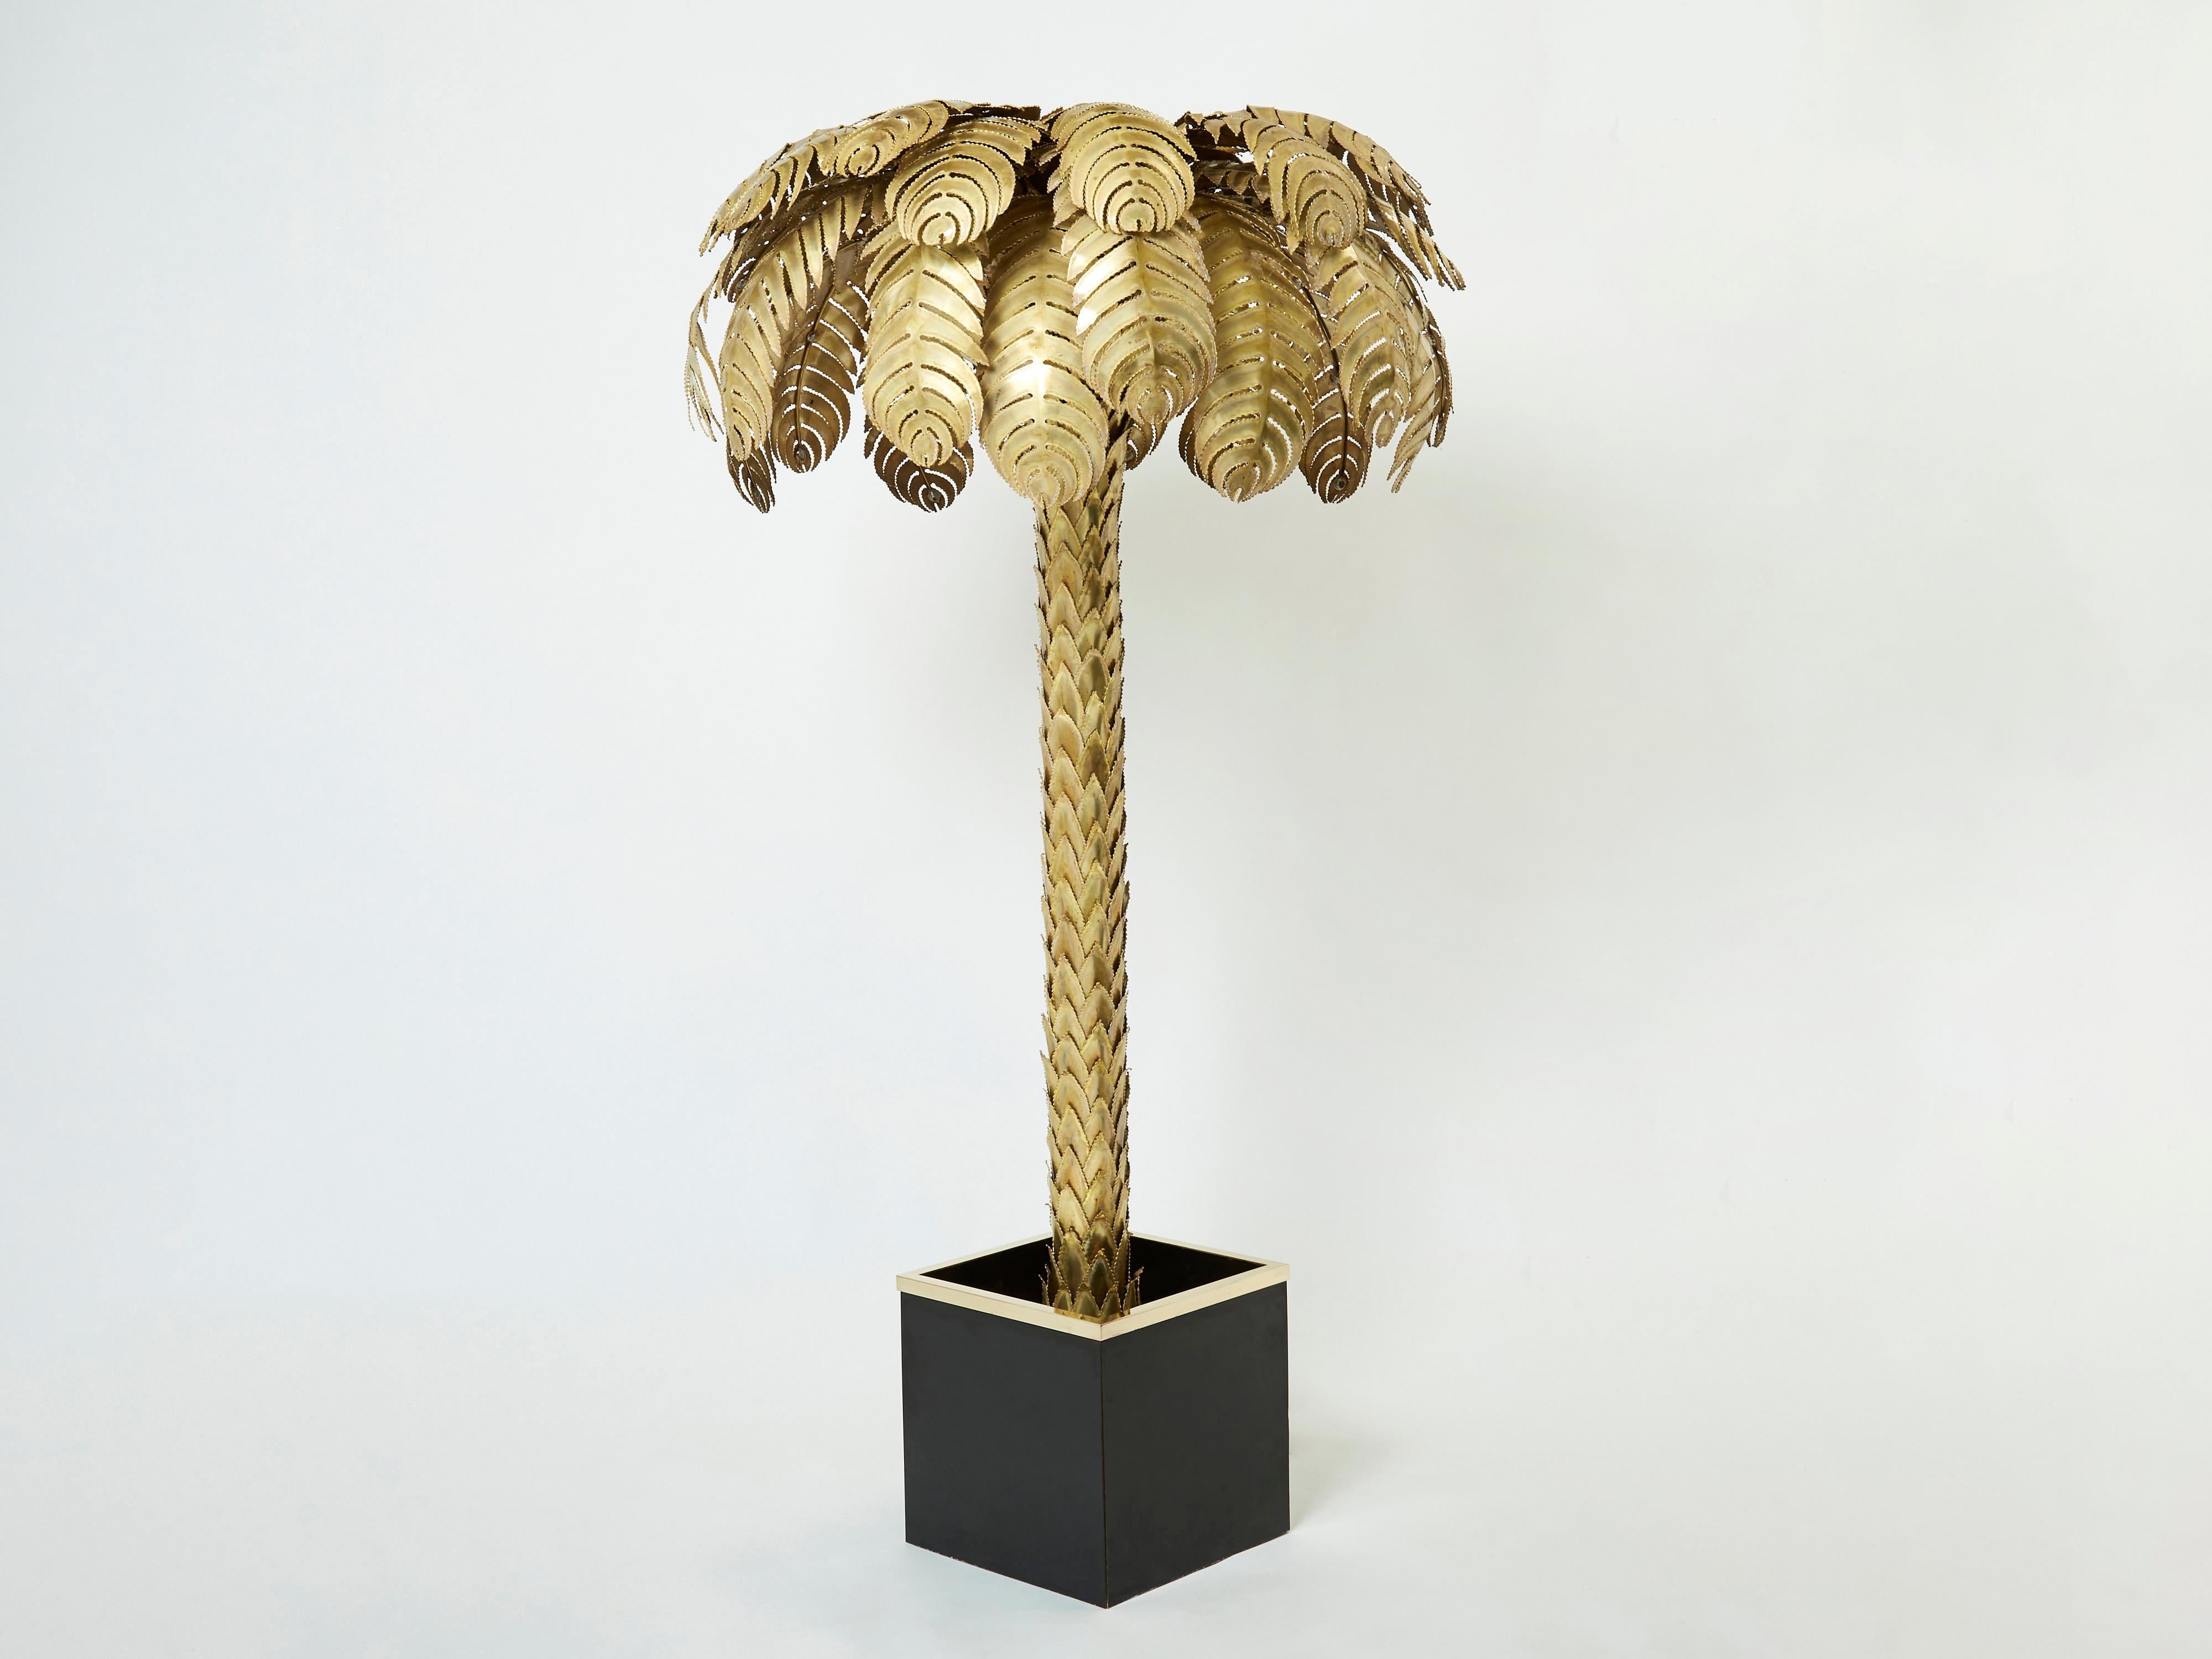 This beautiful palm tree floor lamp is one of the most iconic pieces by French designer Christian Techoueyres for Maison Jansen. It’s made largely from bright brass, which gives it an air of high-end glamour. But what makes the Jansen palm tree